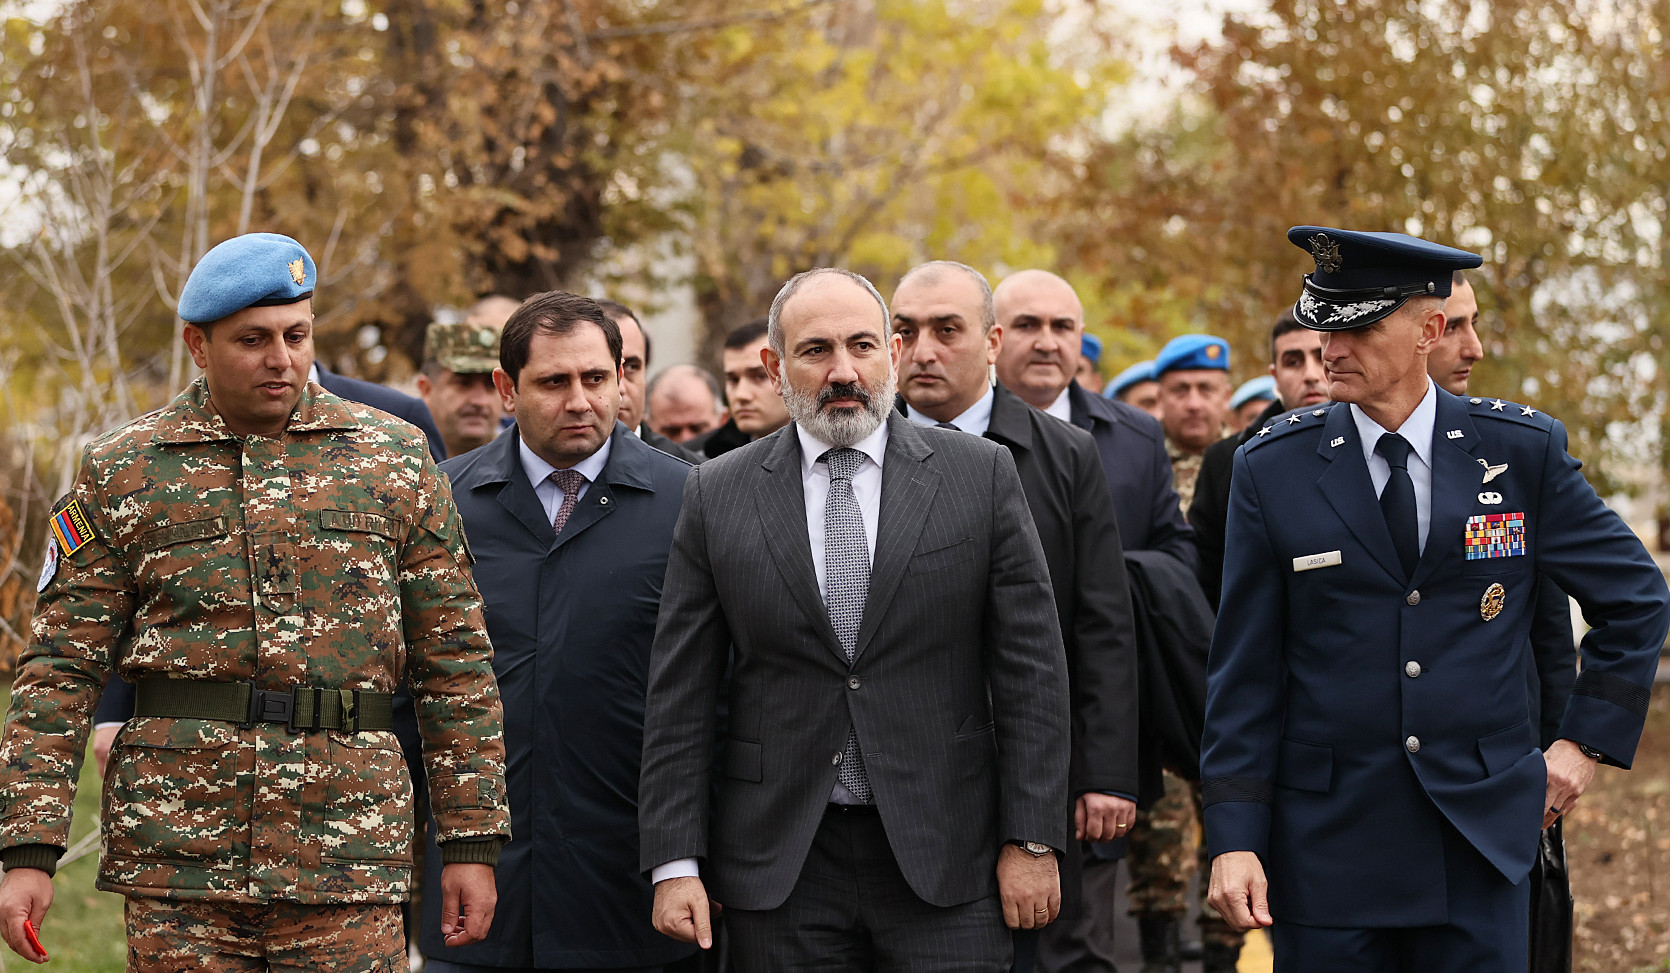 Video - Prime Minister Pashinyan attends the opening ceremony of "Zar" training center of the peacekeeping brigade of the Ministry of Defense